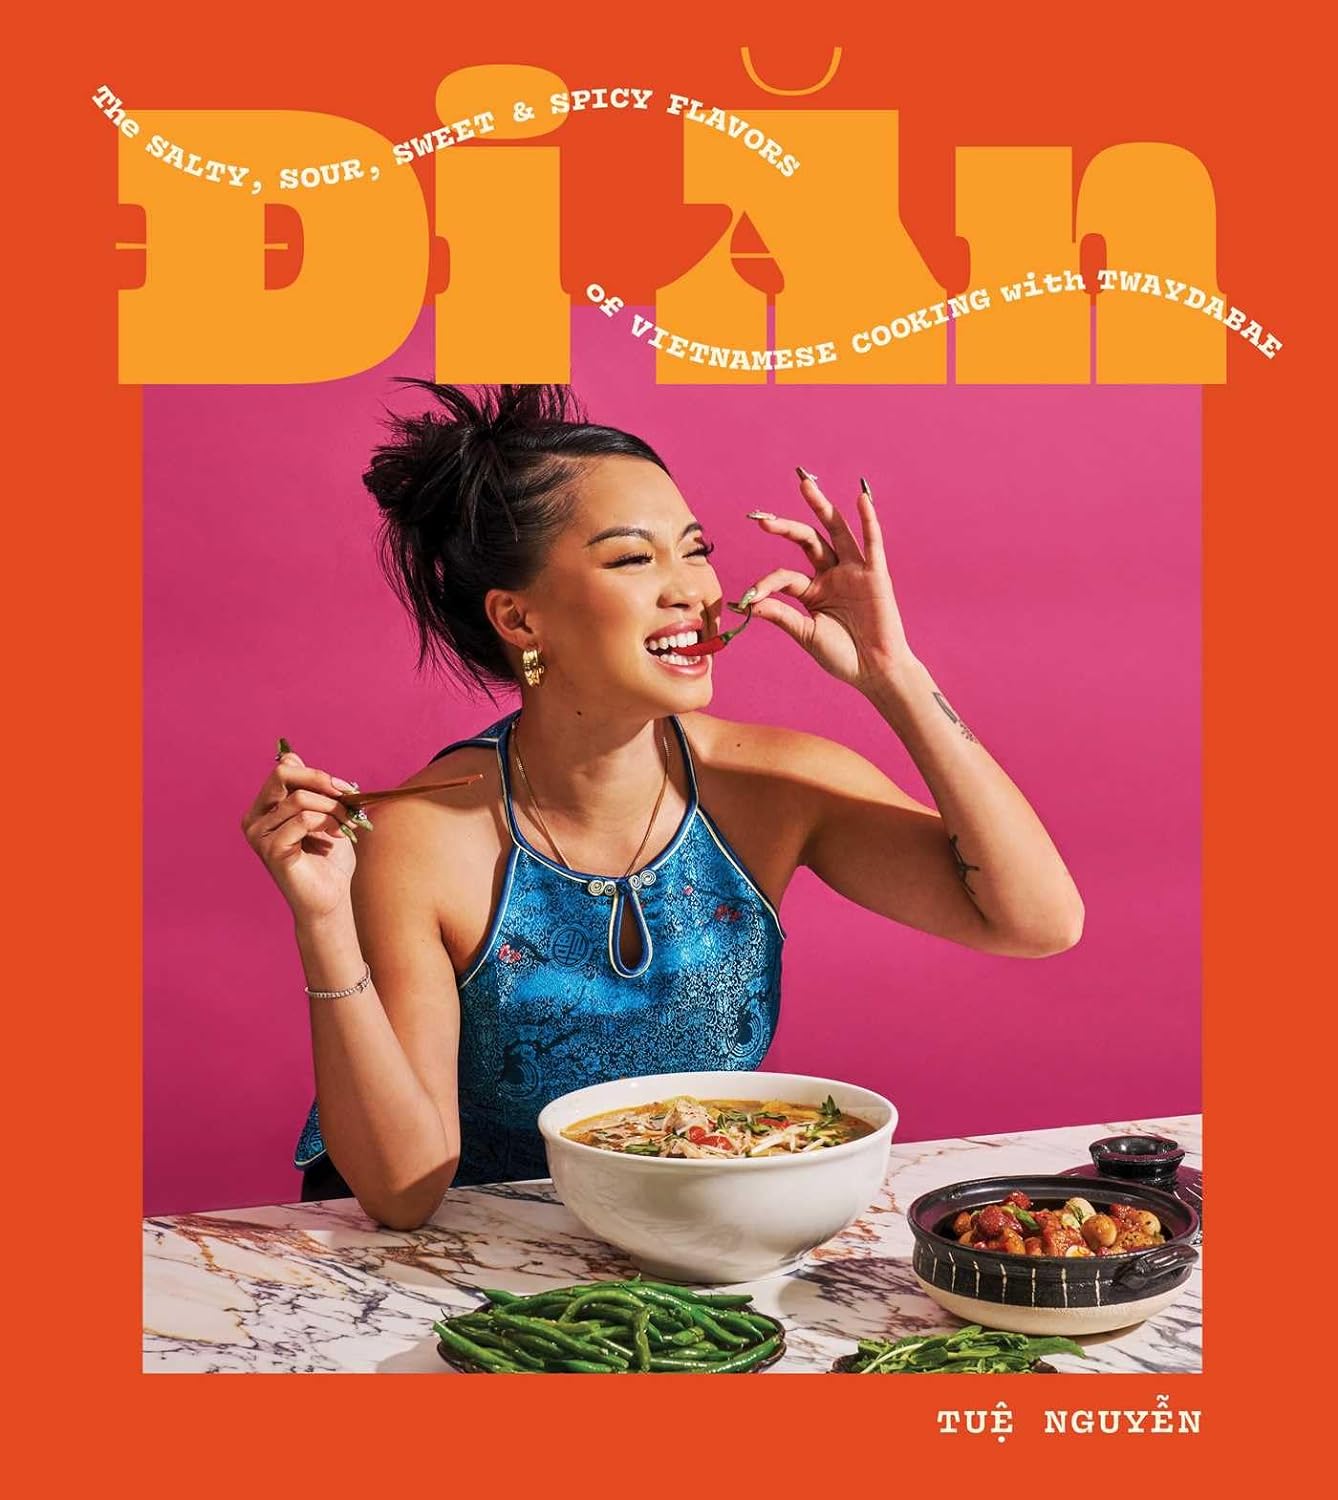 *Pre-order* Di An: The Salty, Sour, Sweet and Spicy Flavors of Vietnamese Cooking with TwayDaBae (Tue Nguyen)